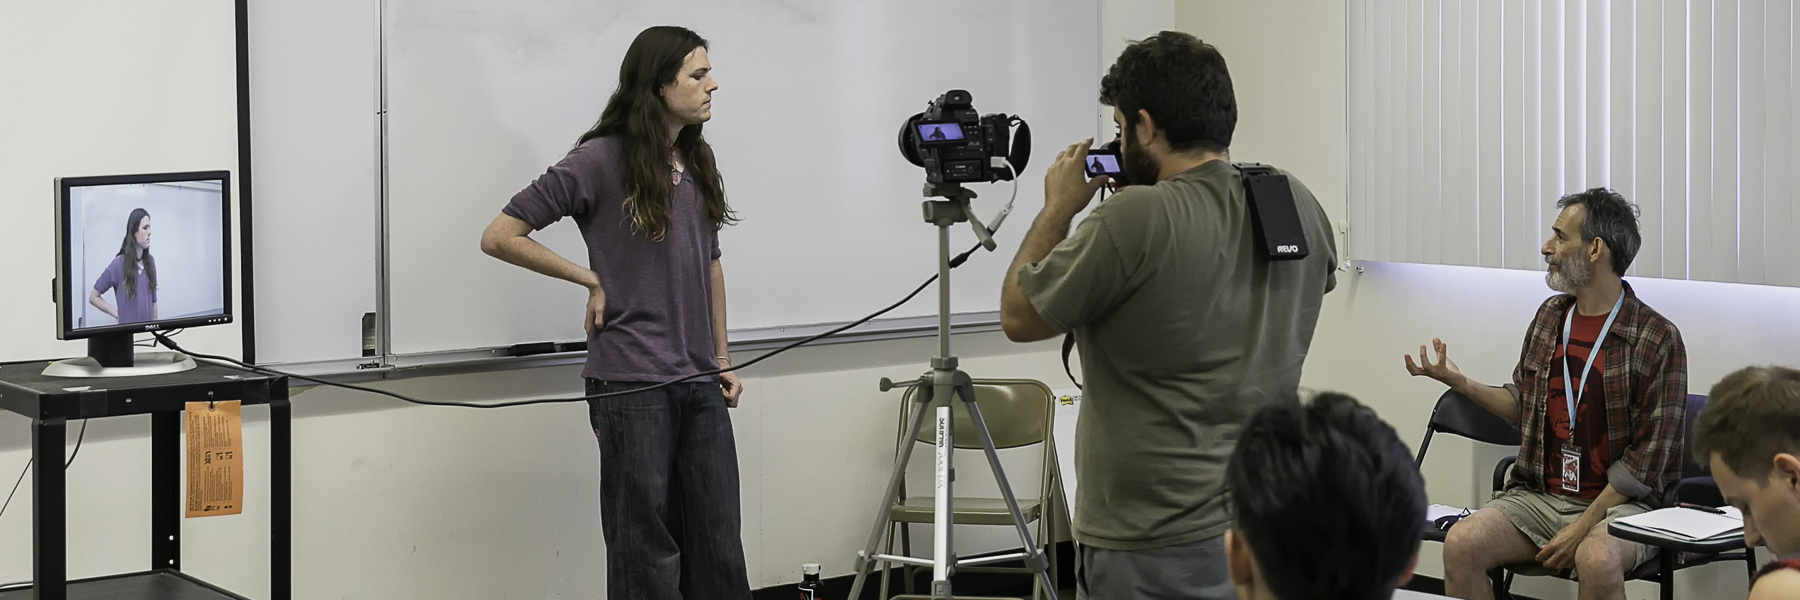 man standing  infront of digial camera in a classroom setting